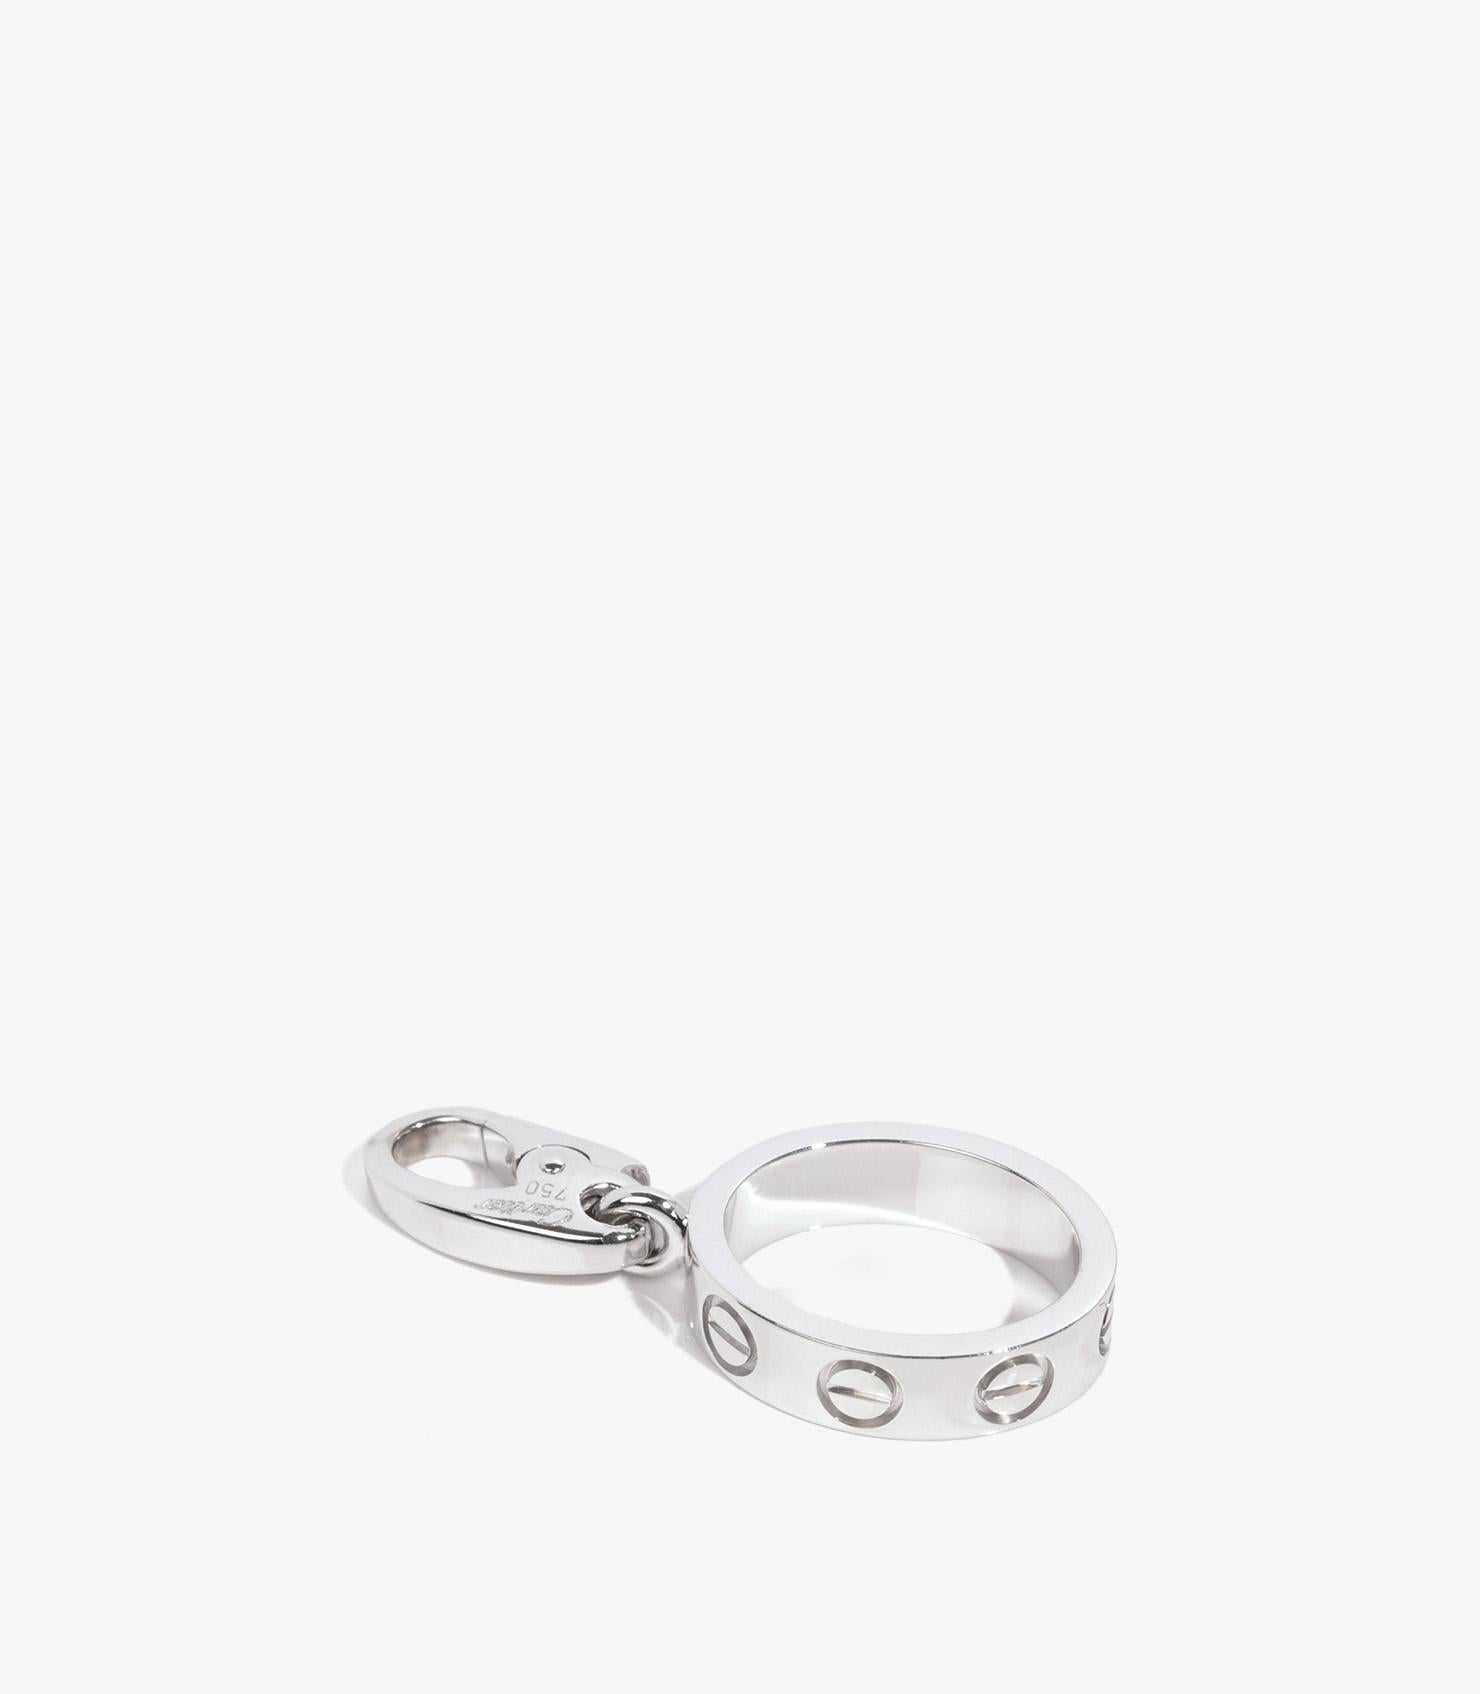 Cartier 18ct White Gold Love Charm

Brand- Cartier
Model- Baby Love Charm
Product Type- Charm
Serial Number- DW****
Material(s)- 18ct White Gold

Length- 2.6cm
Width- 1.2cm
Total Weight- 3.2g

Condition Rating- Excellent
Condition Notes- An item